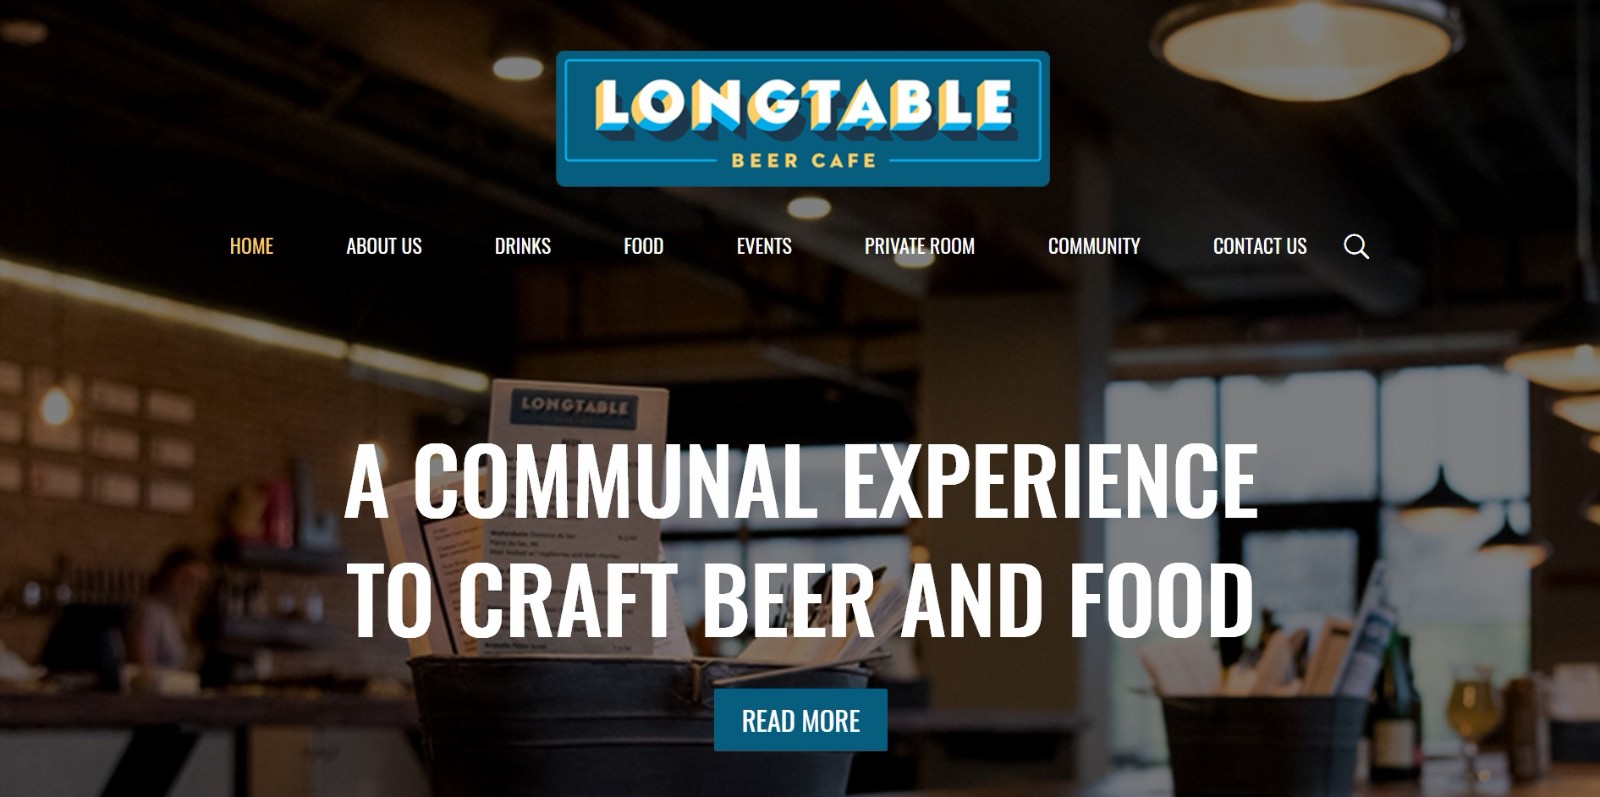 Longtable Beer Cafe